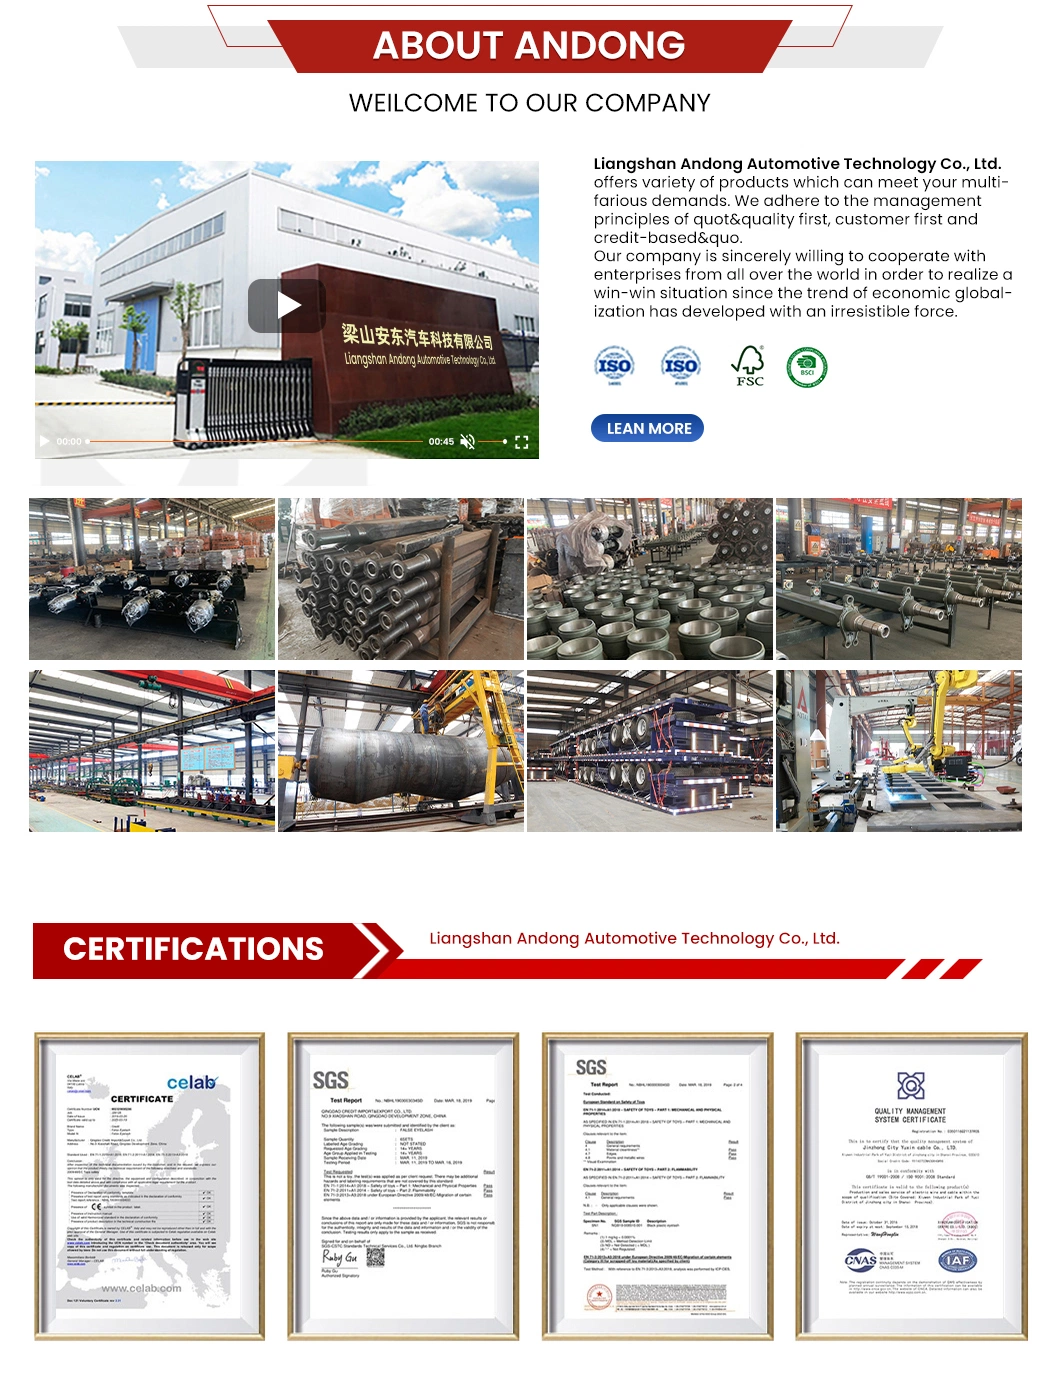 Anton&prime;s Main Truck Trailers Goods Transport Vehicles, in The New Shaft, Hook Machine Plate Export Production